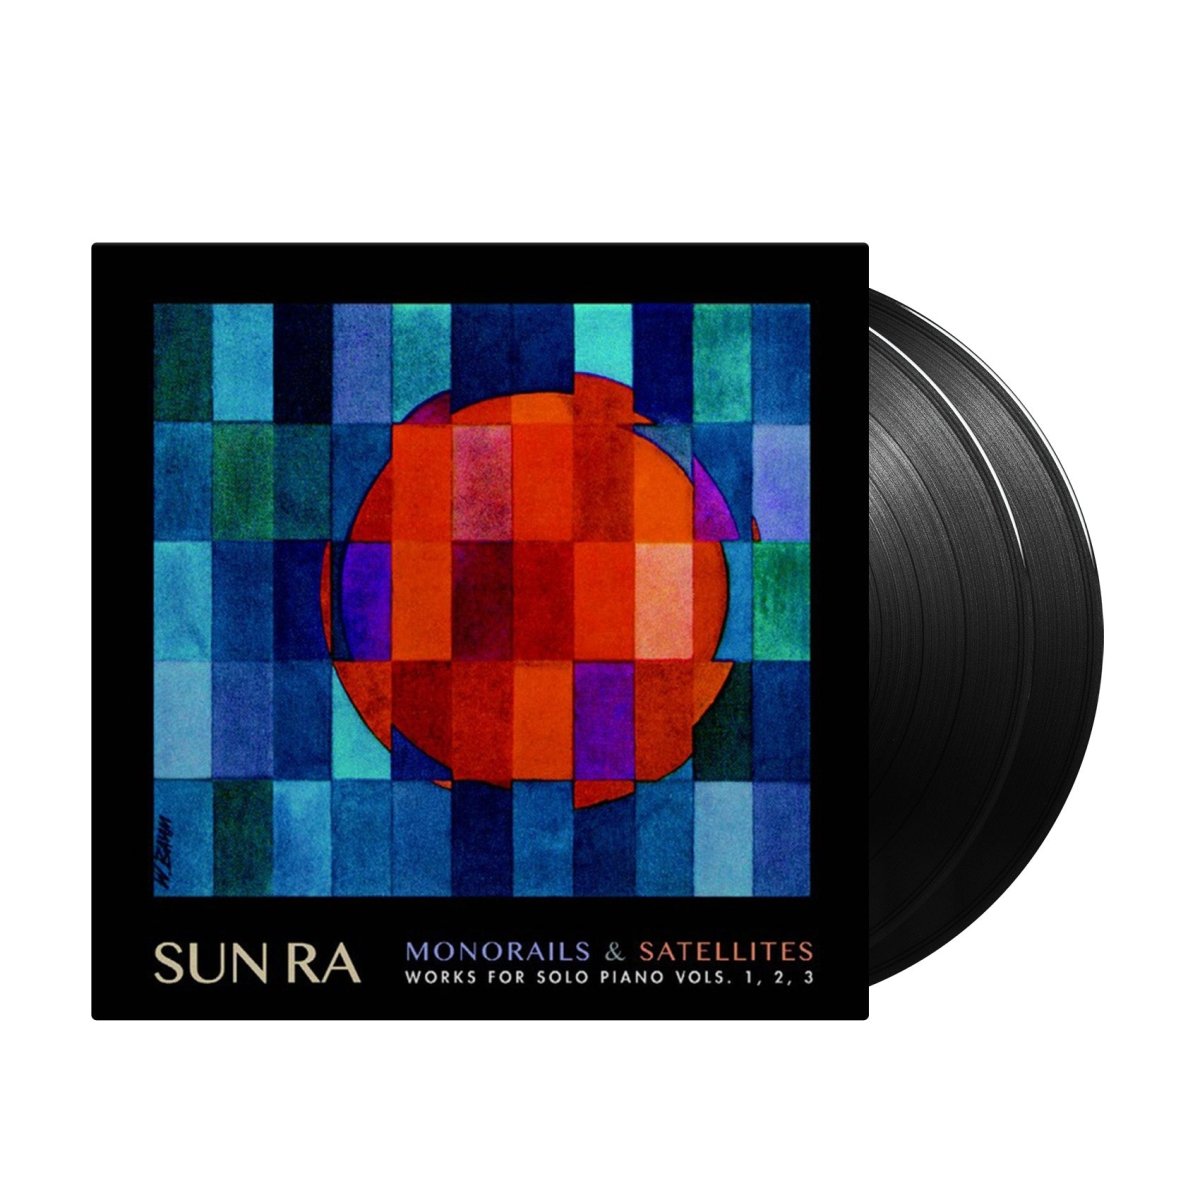 Sun Ra - Monorails & Satellites: Works for Solo Piano Vols. 1, 2, 3 - Inner Ocean Records